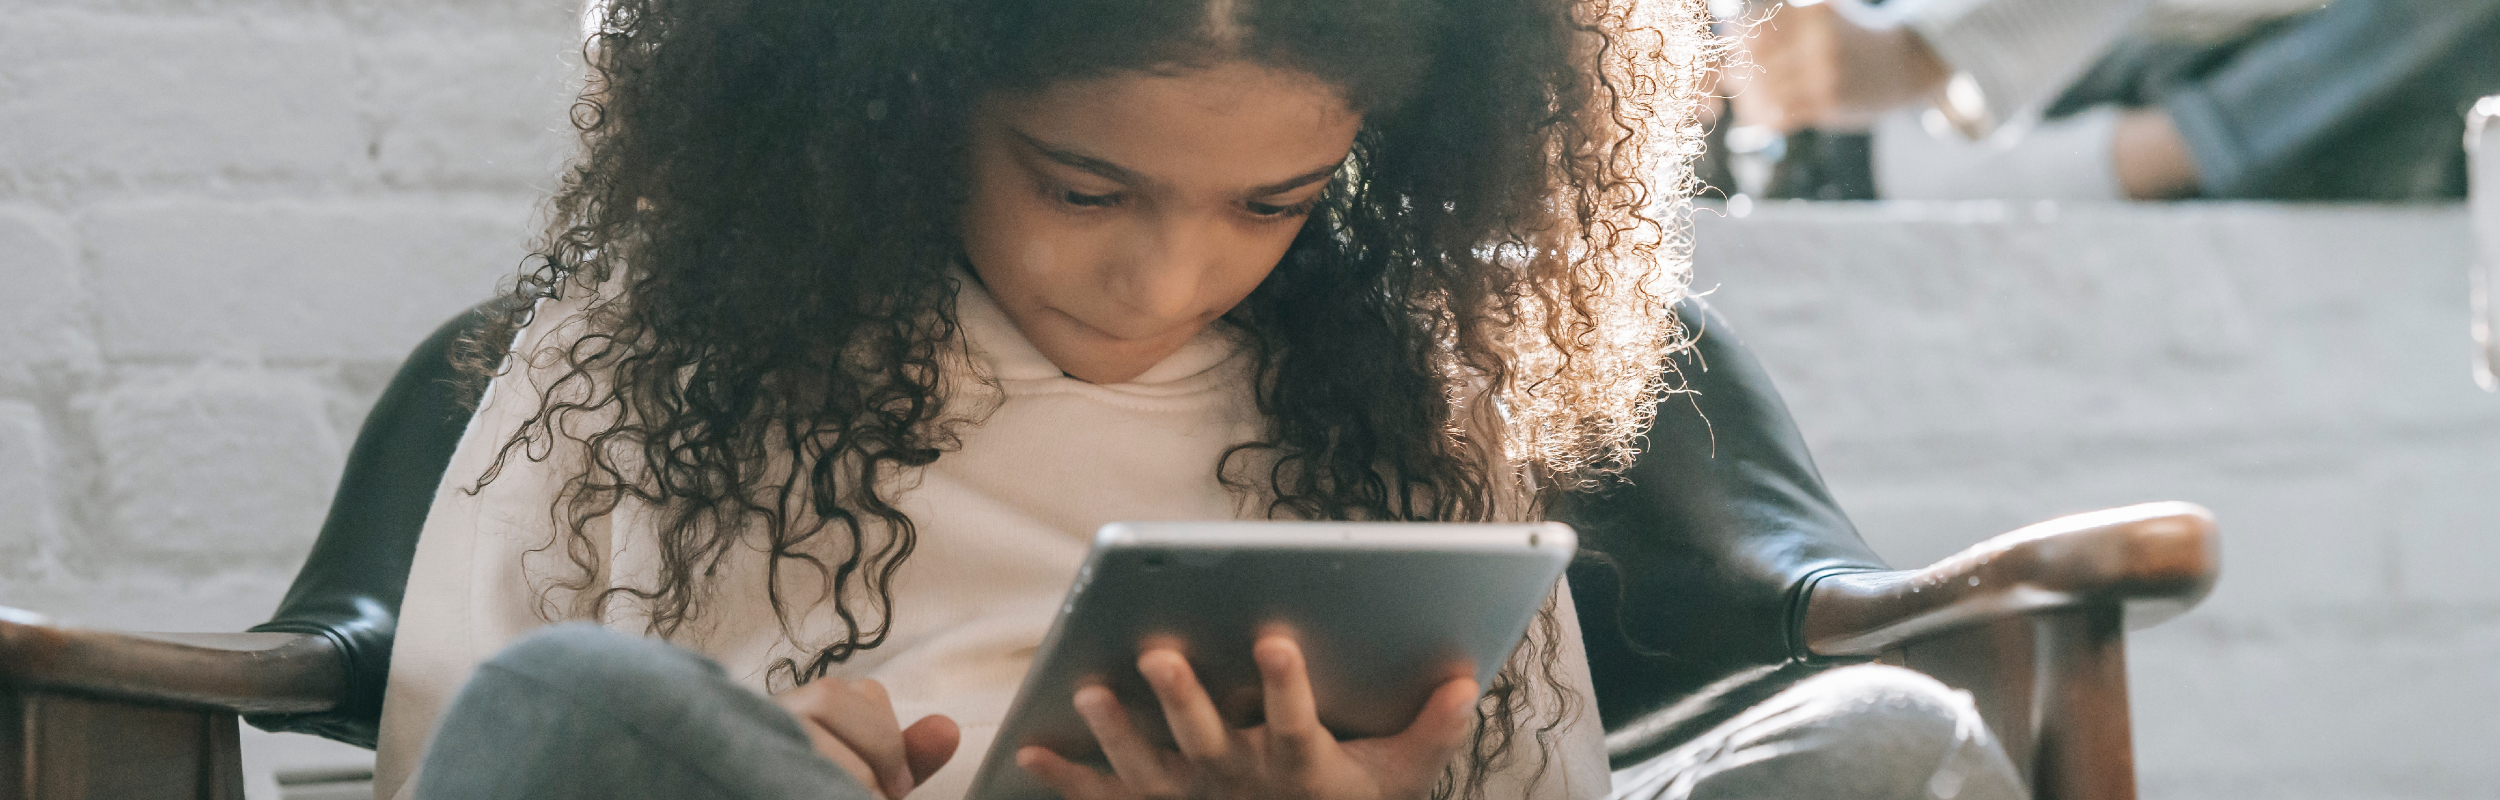 Almost overnight, children’s lives became digital by default. What have we discovered?